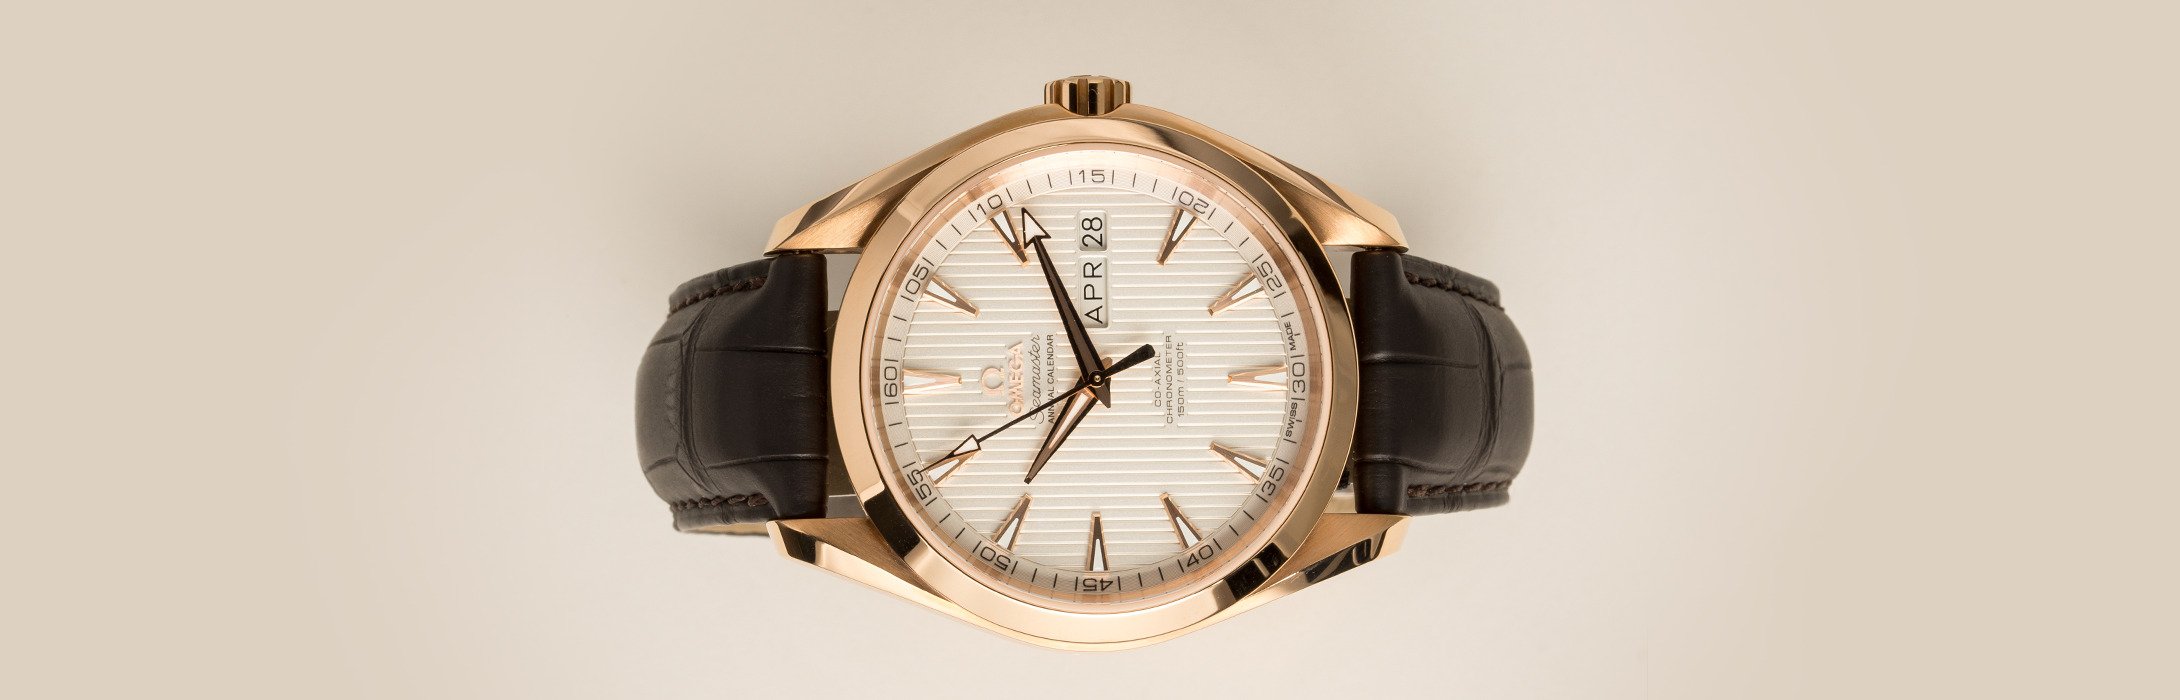 Omega Dress Watch Ultimate Buying Guide